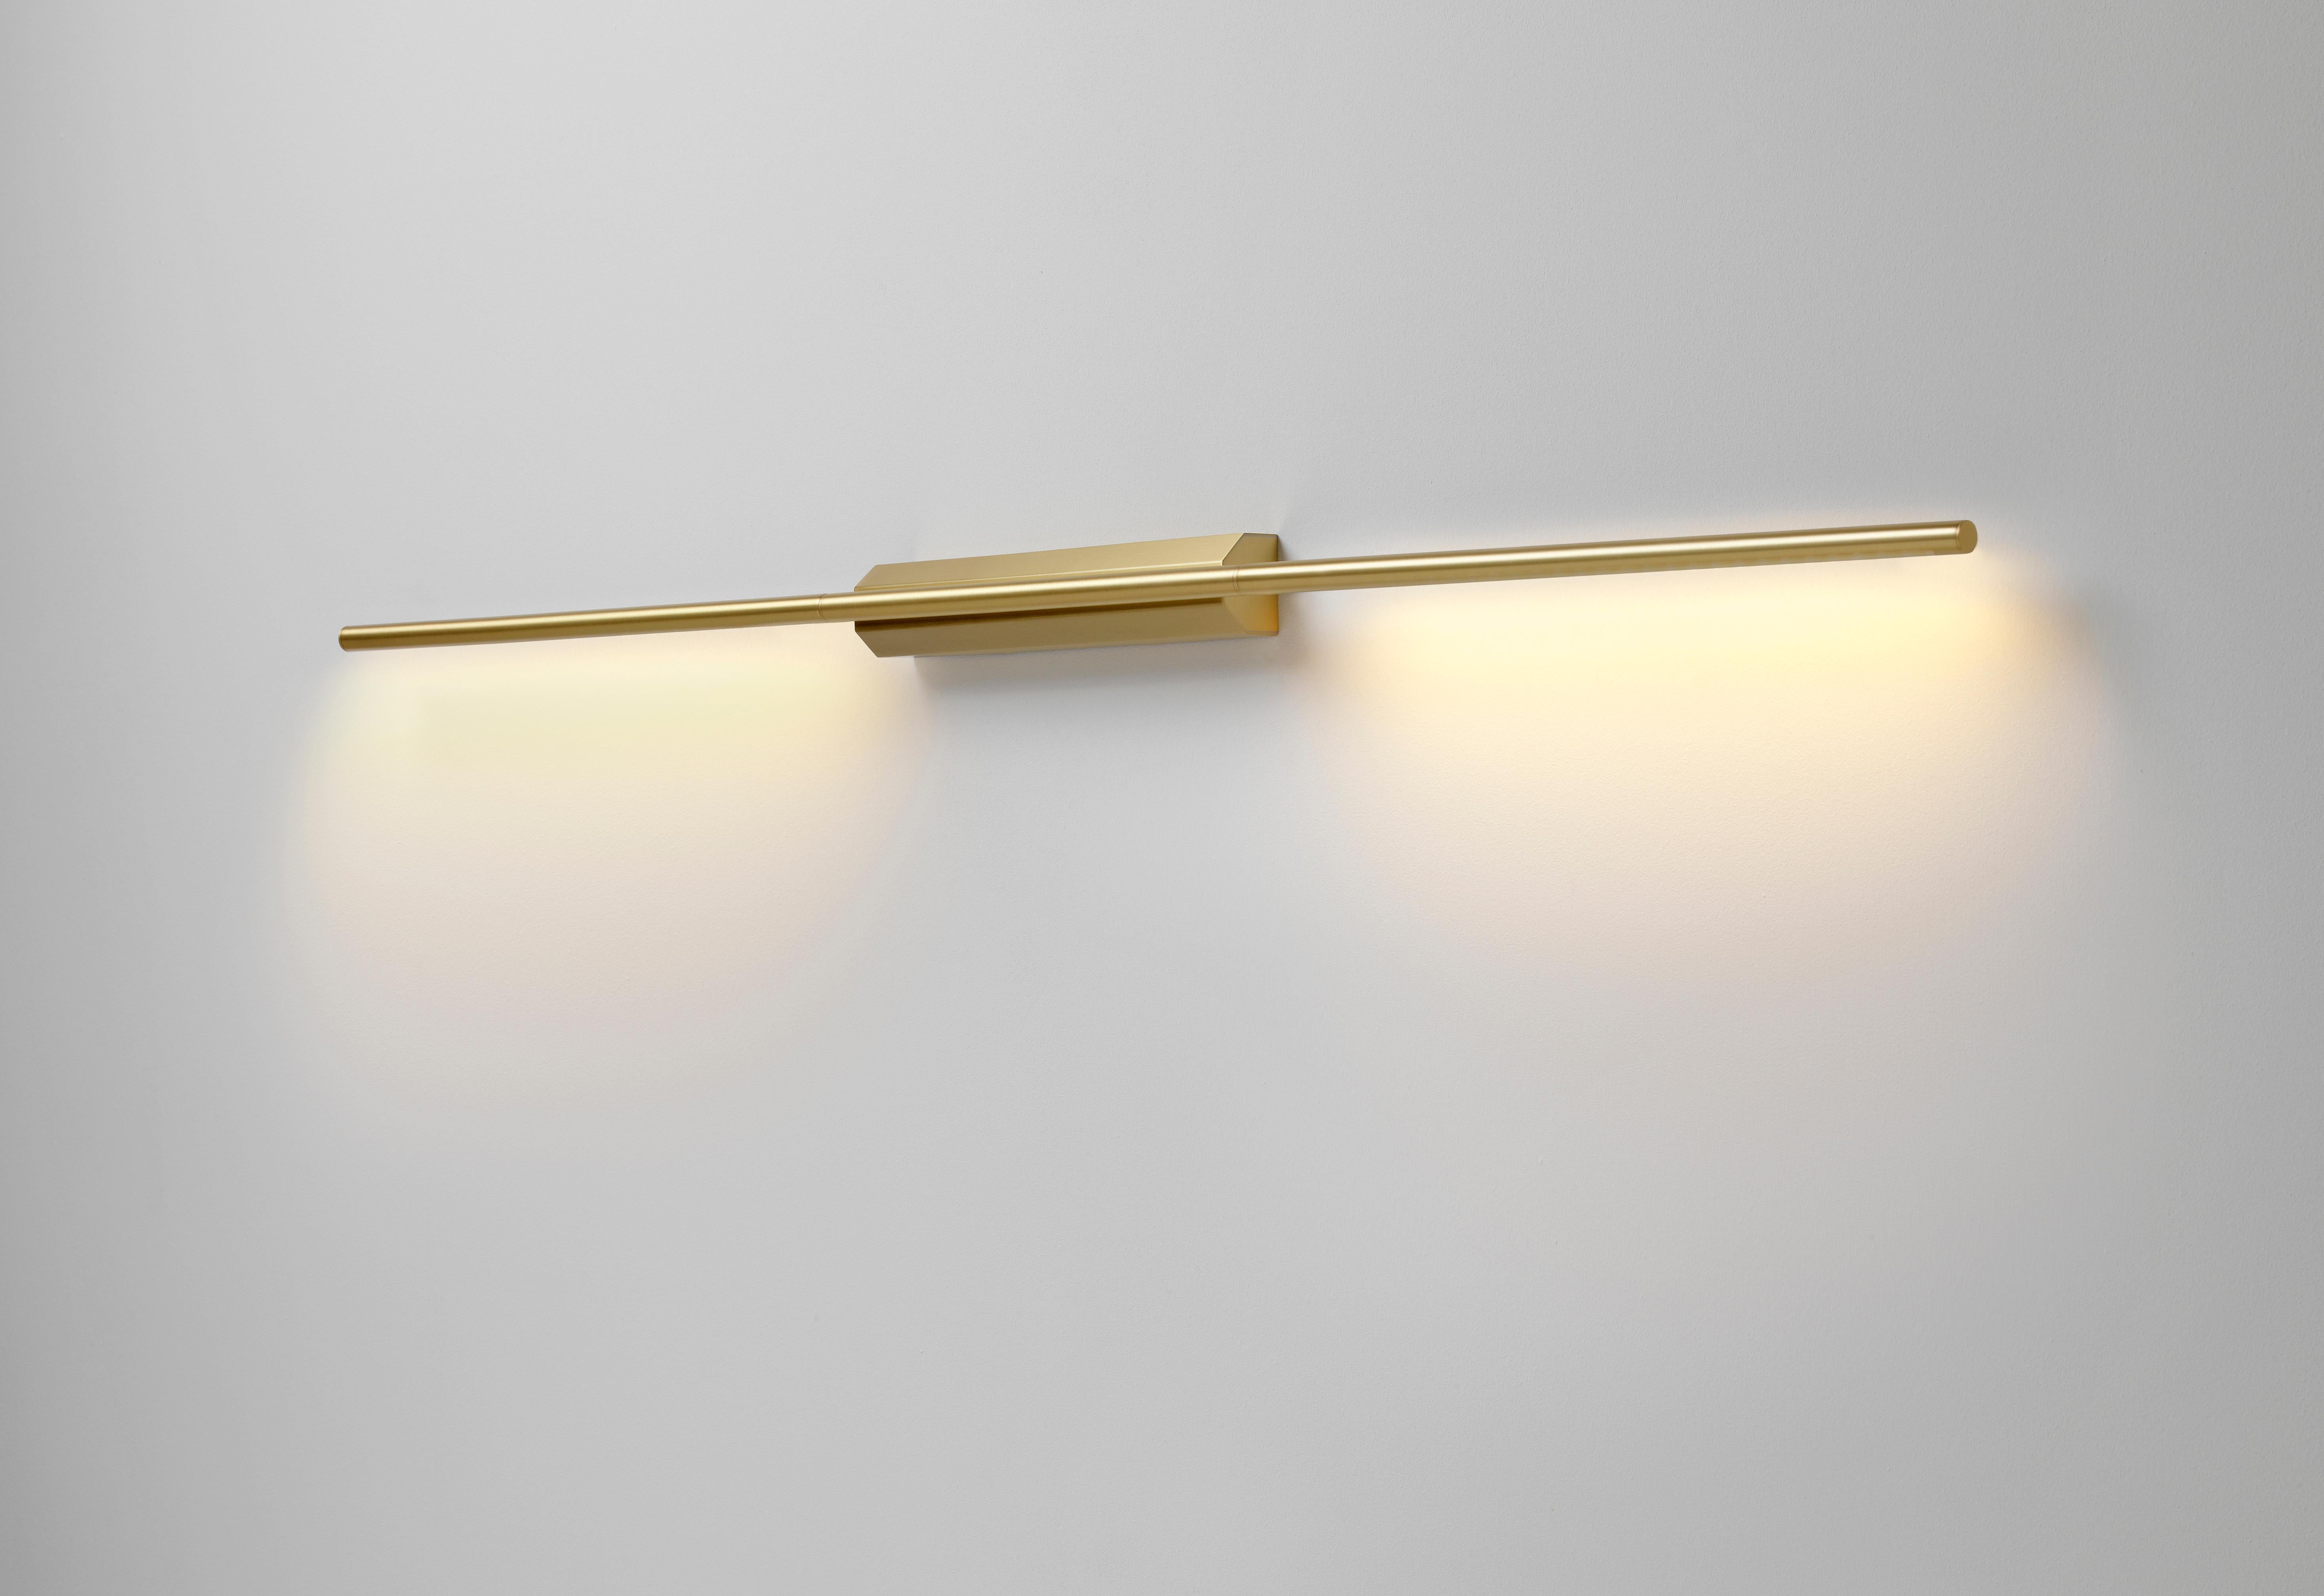 IP Link Double 1300 Satin brass wall light by Emilie Cathelineau
Dimensions: D4.5 x W5 X H1300 cm
Materials: Solid brass, Satin Brass, LED, Polycarbonate.
Others finishes and dimensions are available.

All our lamps can be wired according to